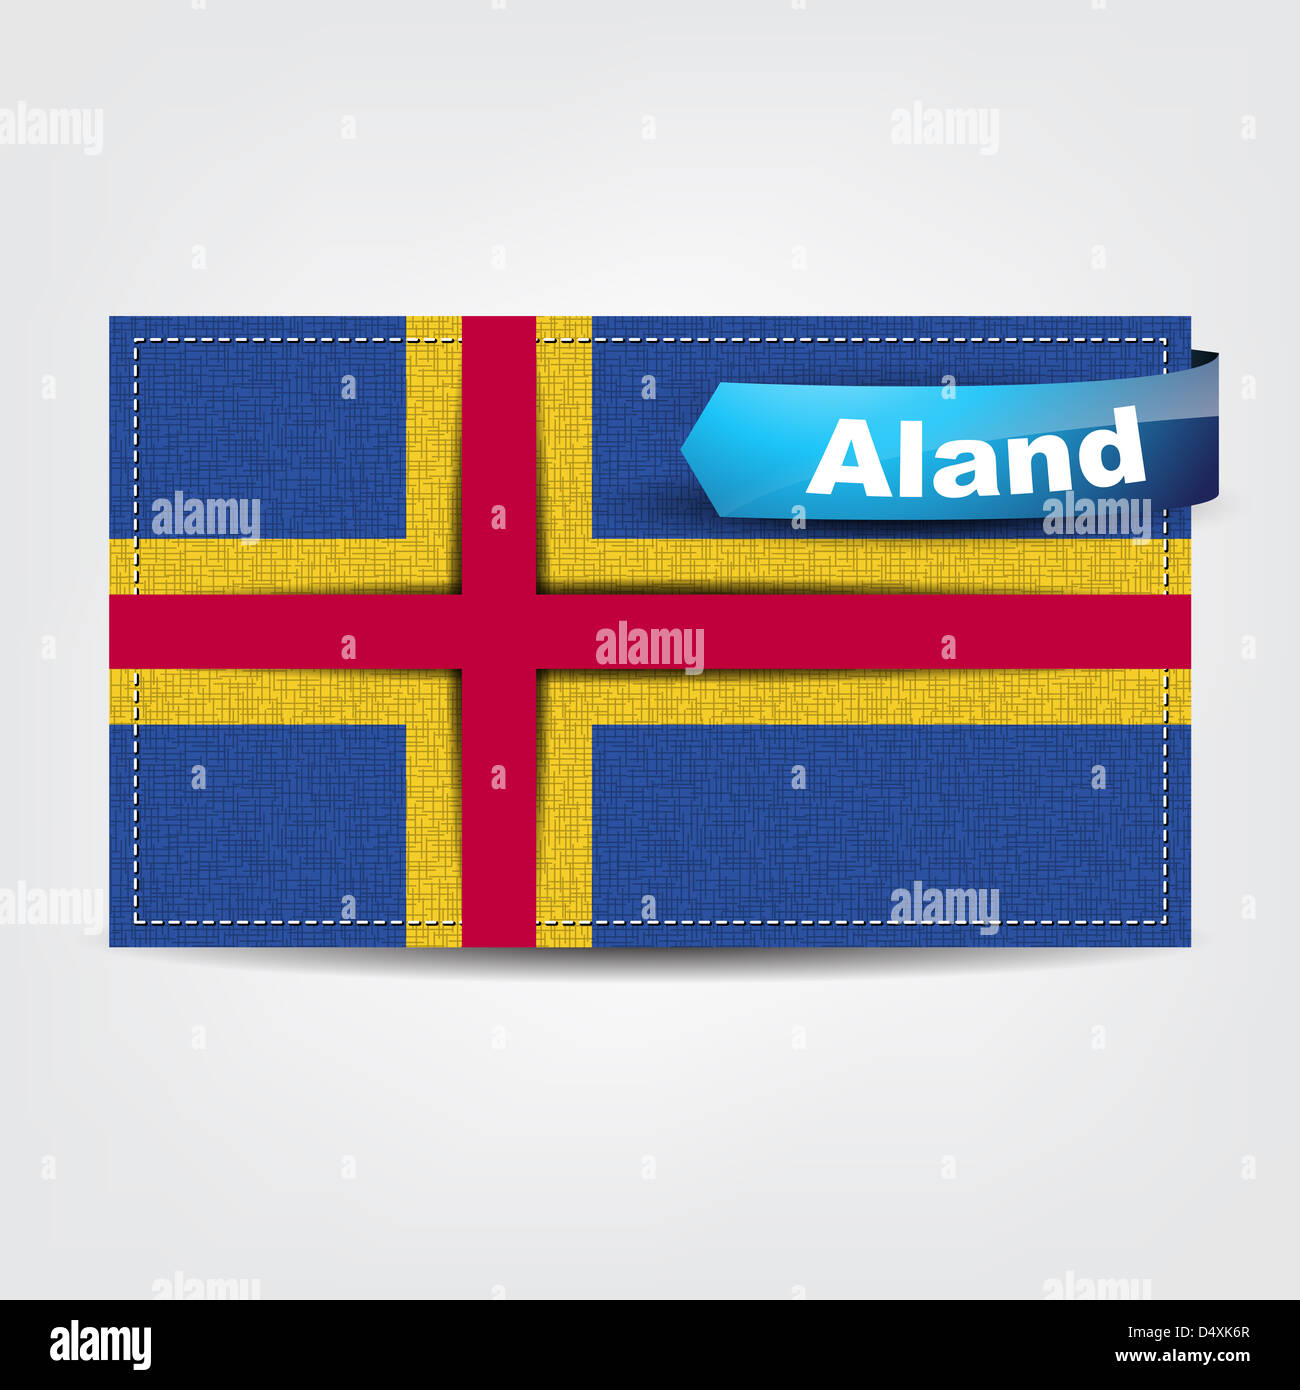 Fabric texture of the flag of Aland with a blue bow. Stock Photo